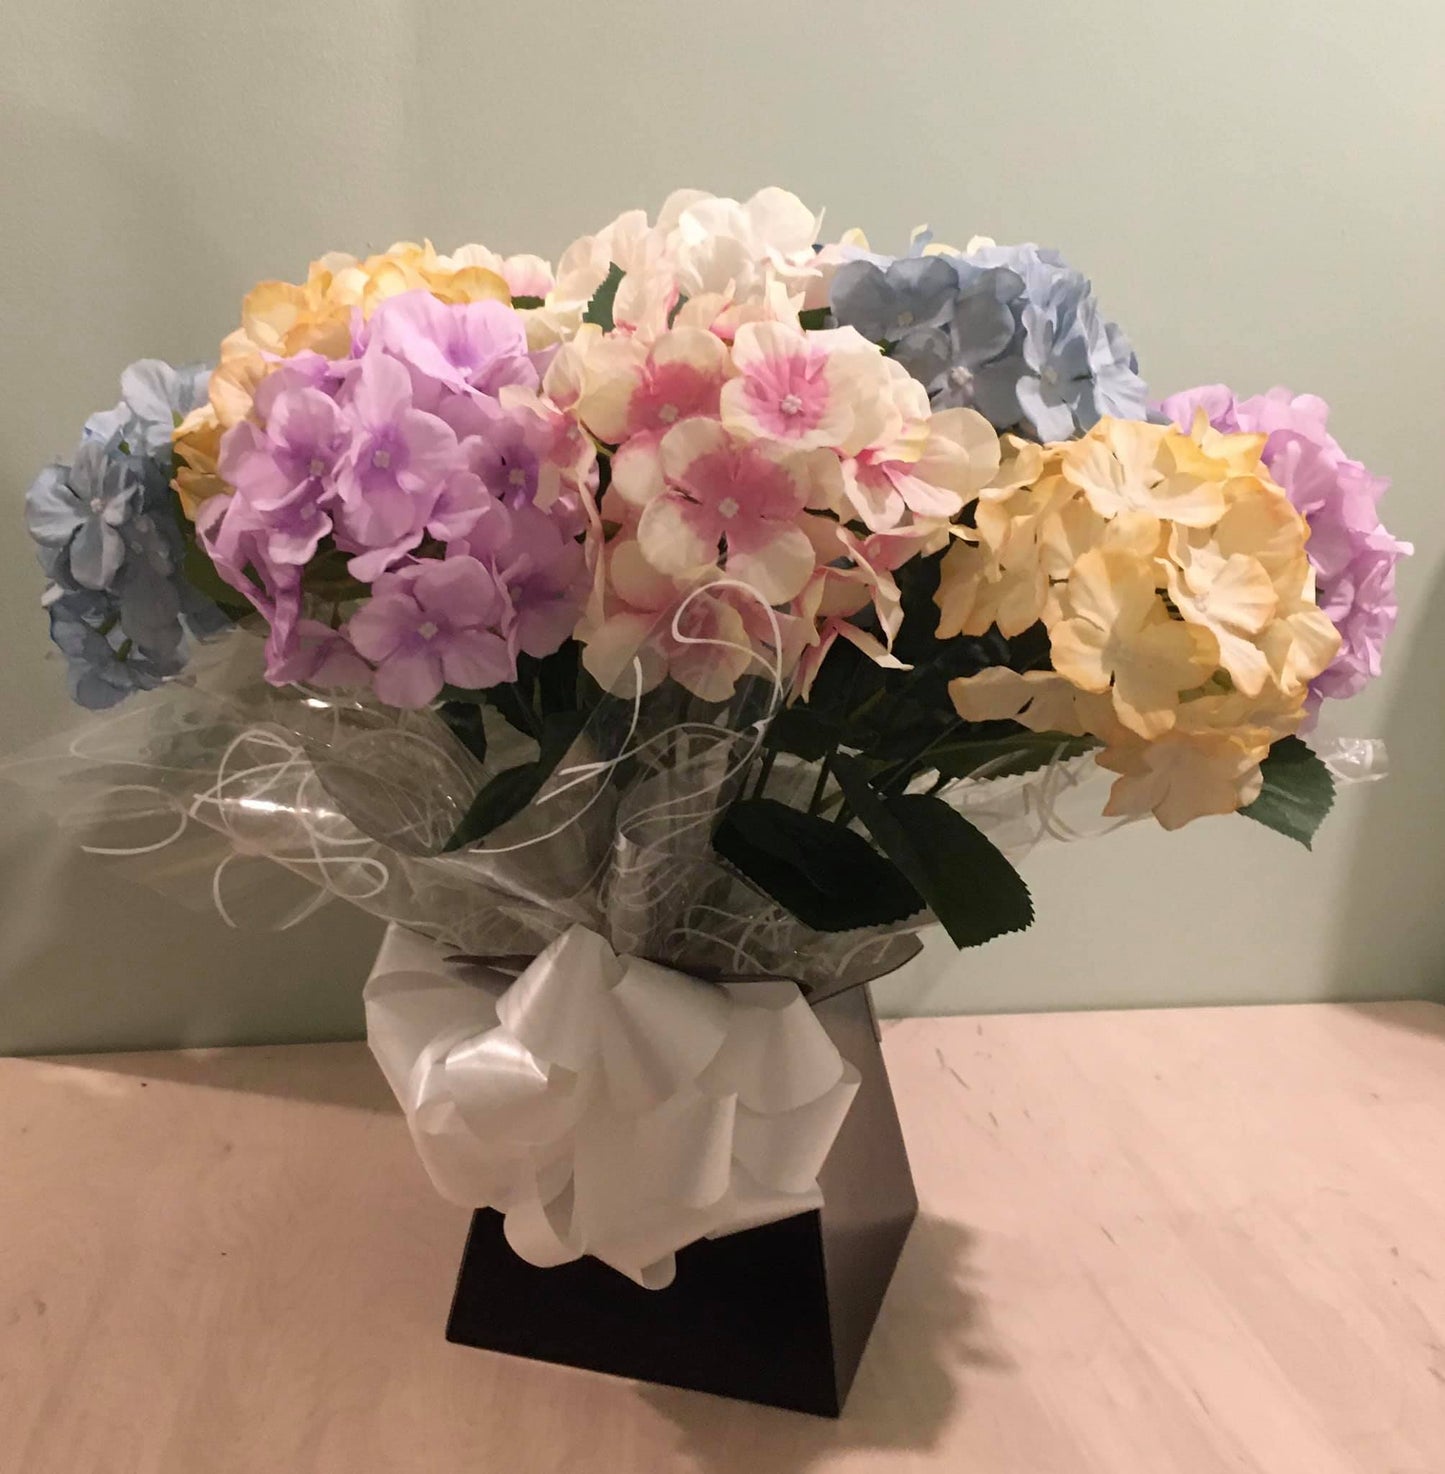 "Spring Hydrangeas Bumper Kit" Forever Flowerz approx 30 bunches